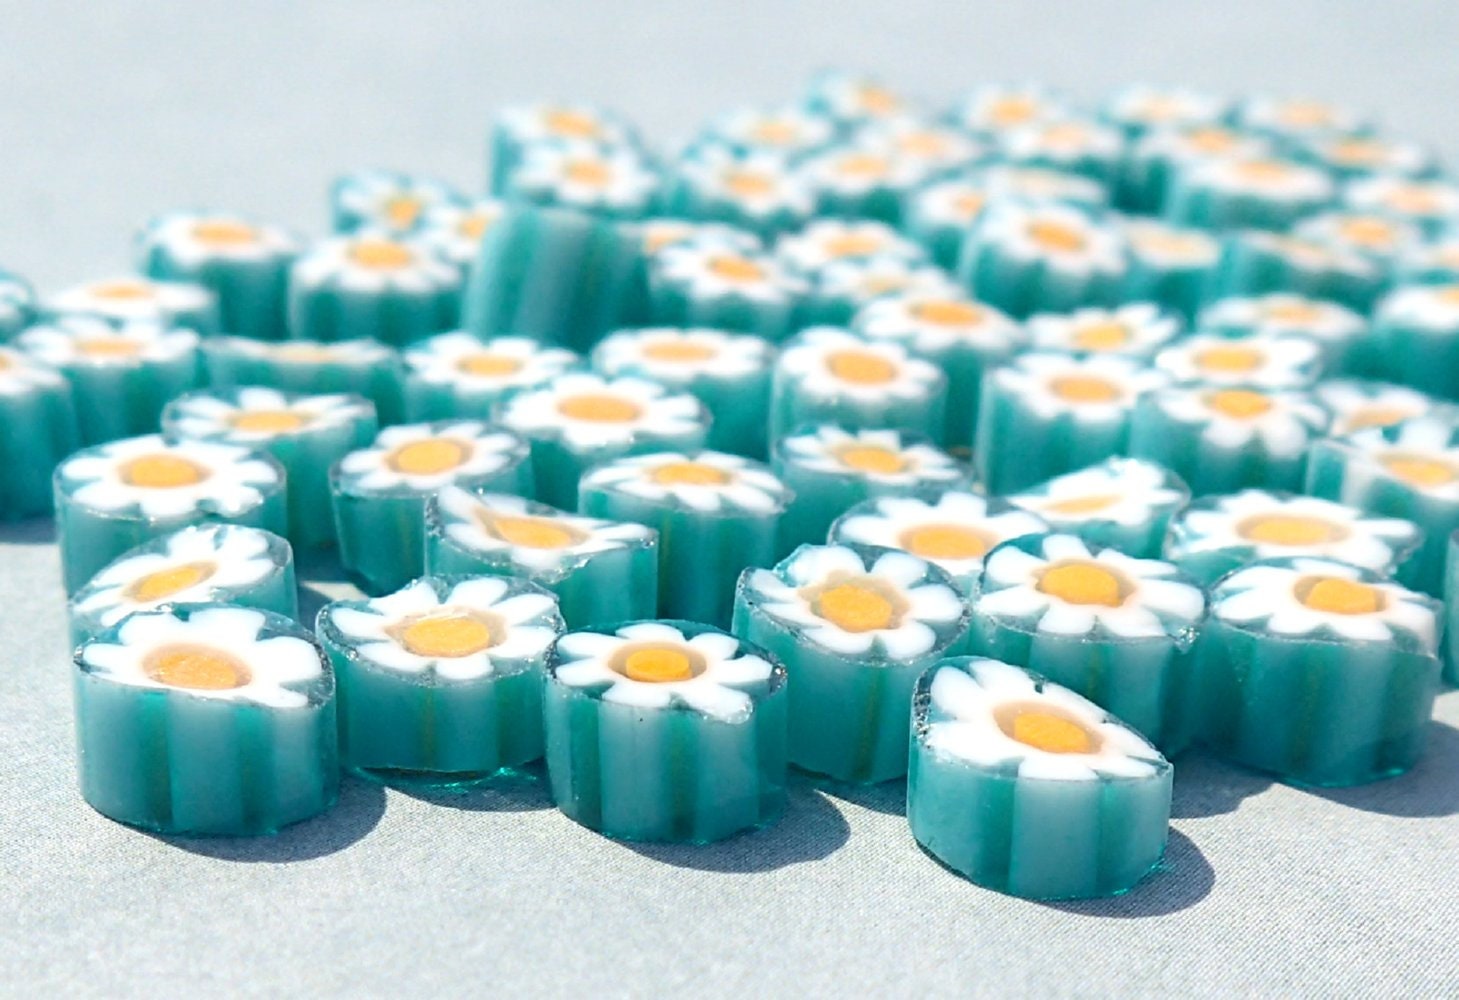 White Daisy in Teal Millefiori - 25 grams - Unique Mosaic Glass Tiles - Floral Pattern